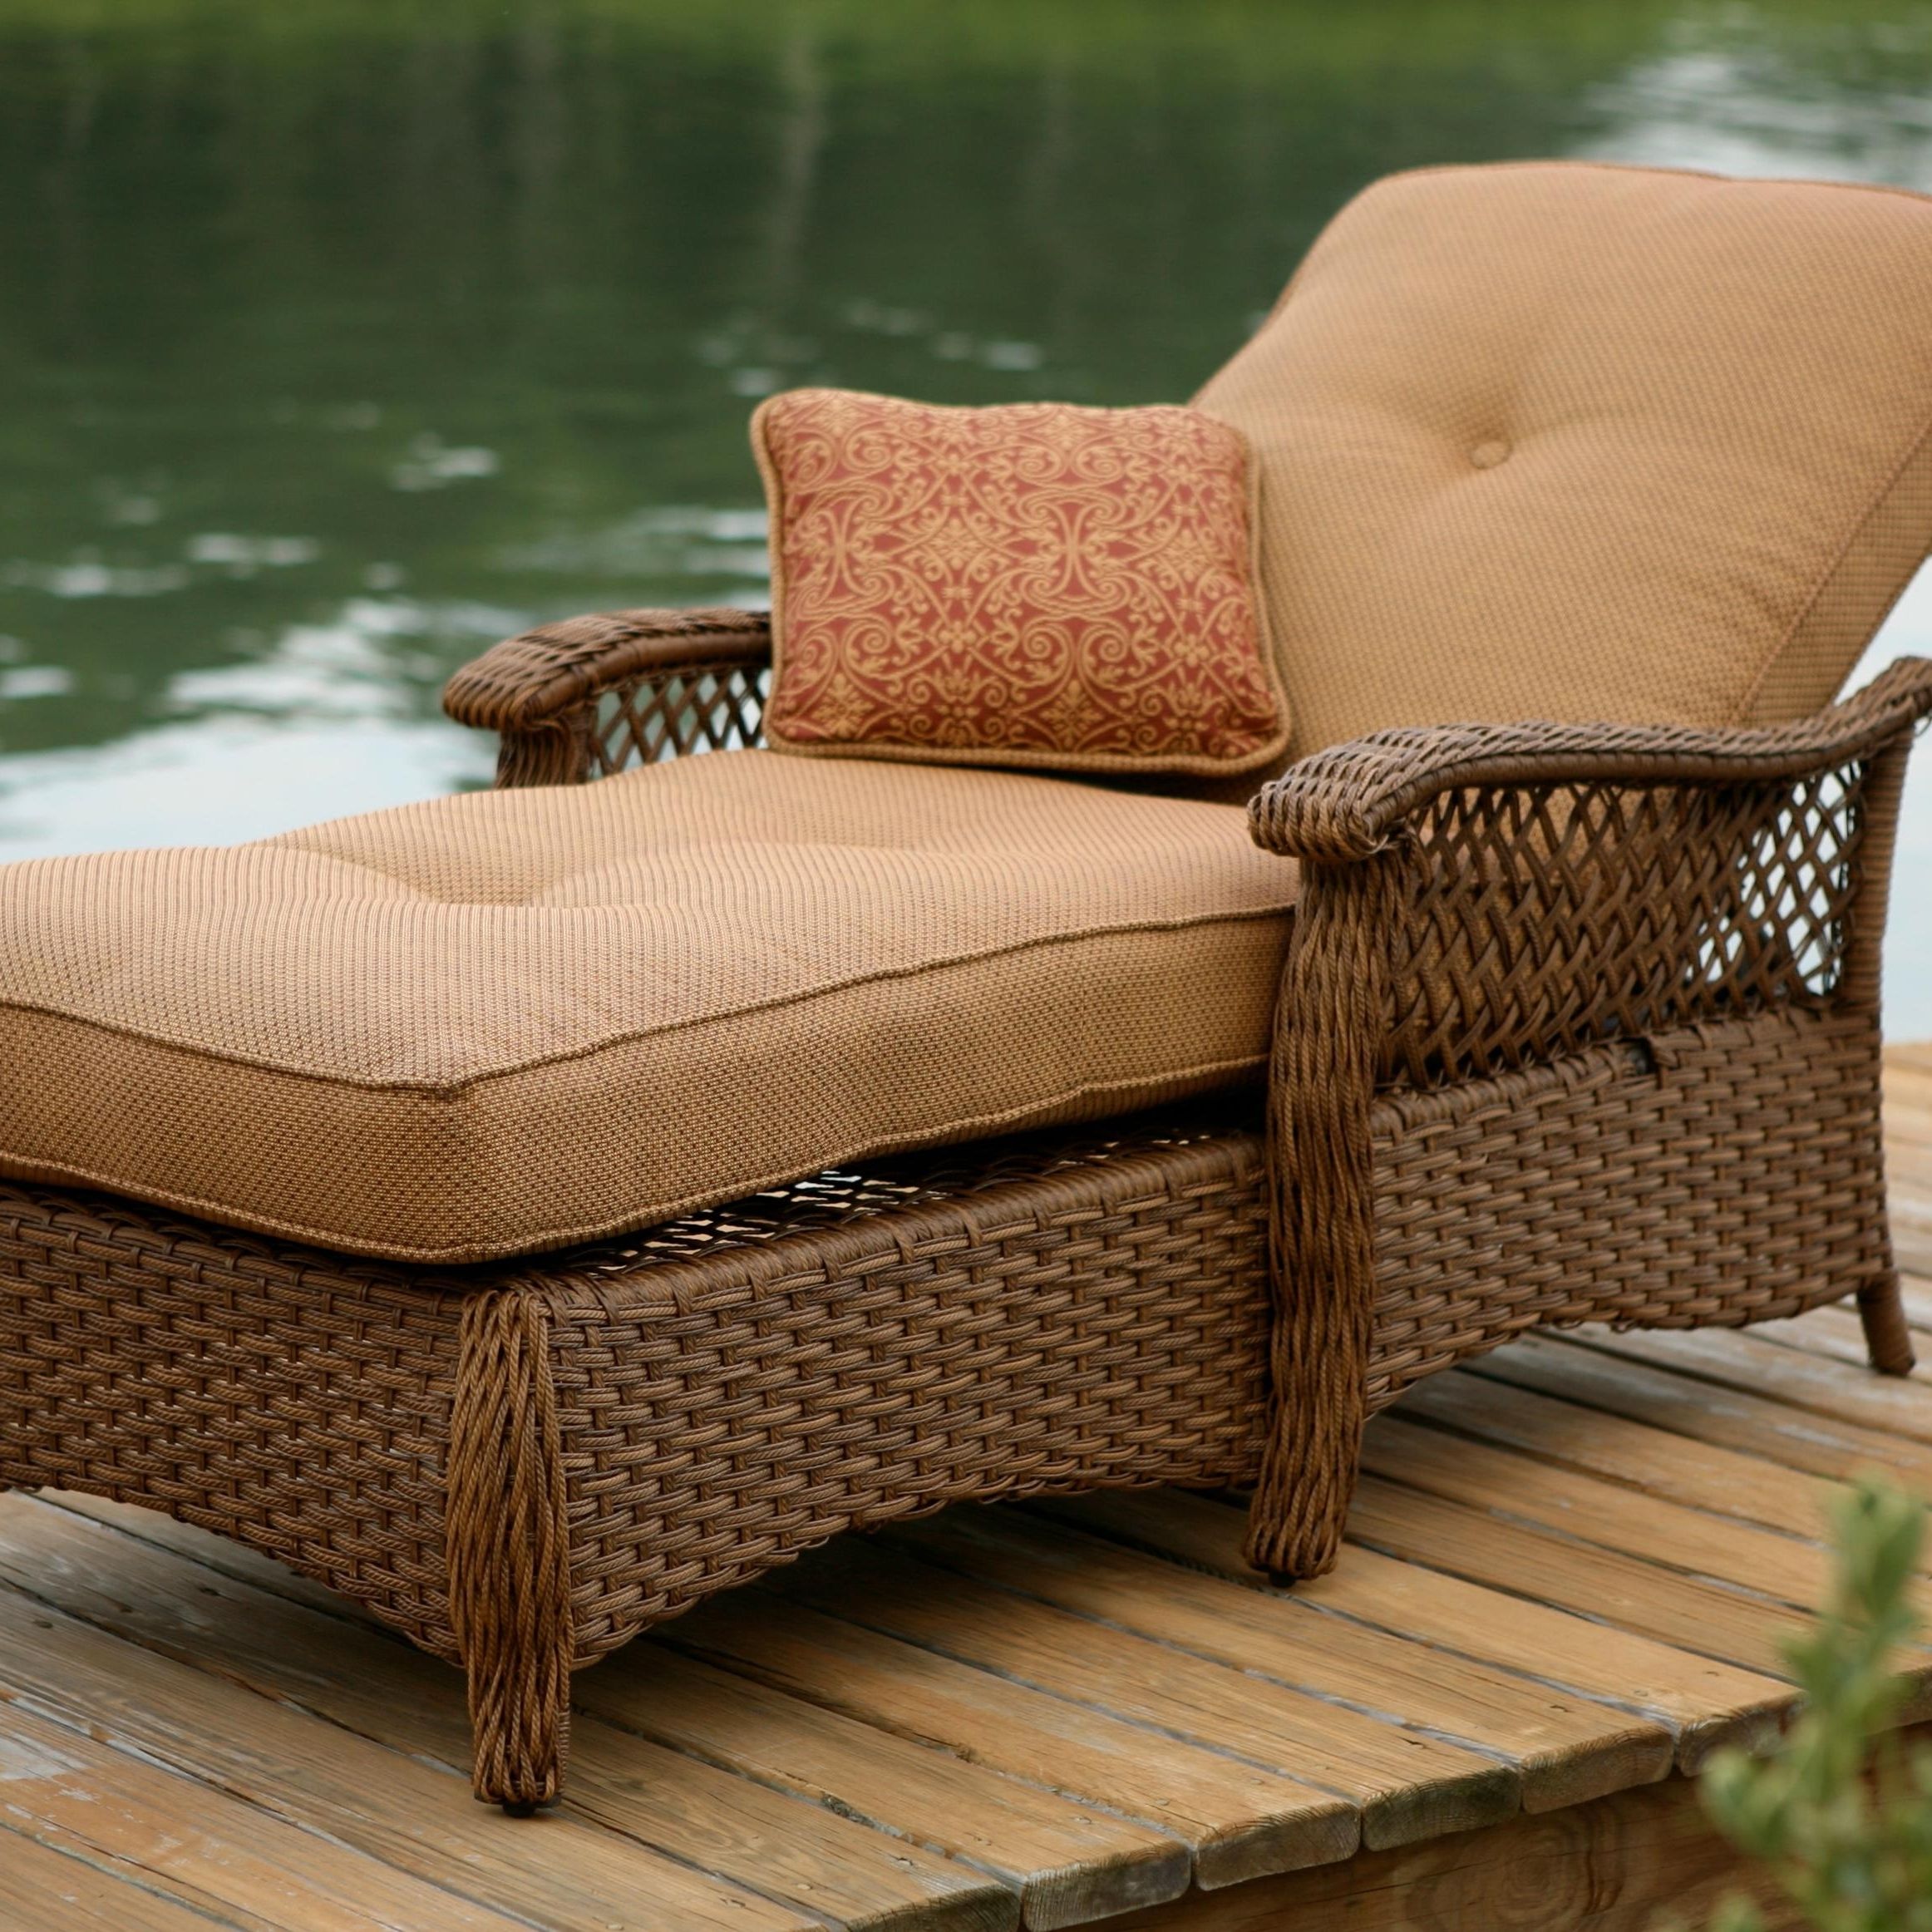 Most Popular Target Outdoor Chaise Lounges In Agio Veranda–agio Outdoor Tan Woven Chaise Lounge Chair With Seat (View 4 of 15)